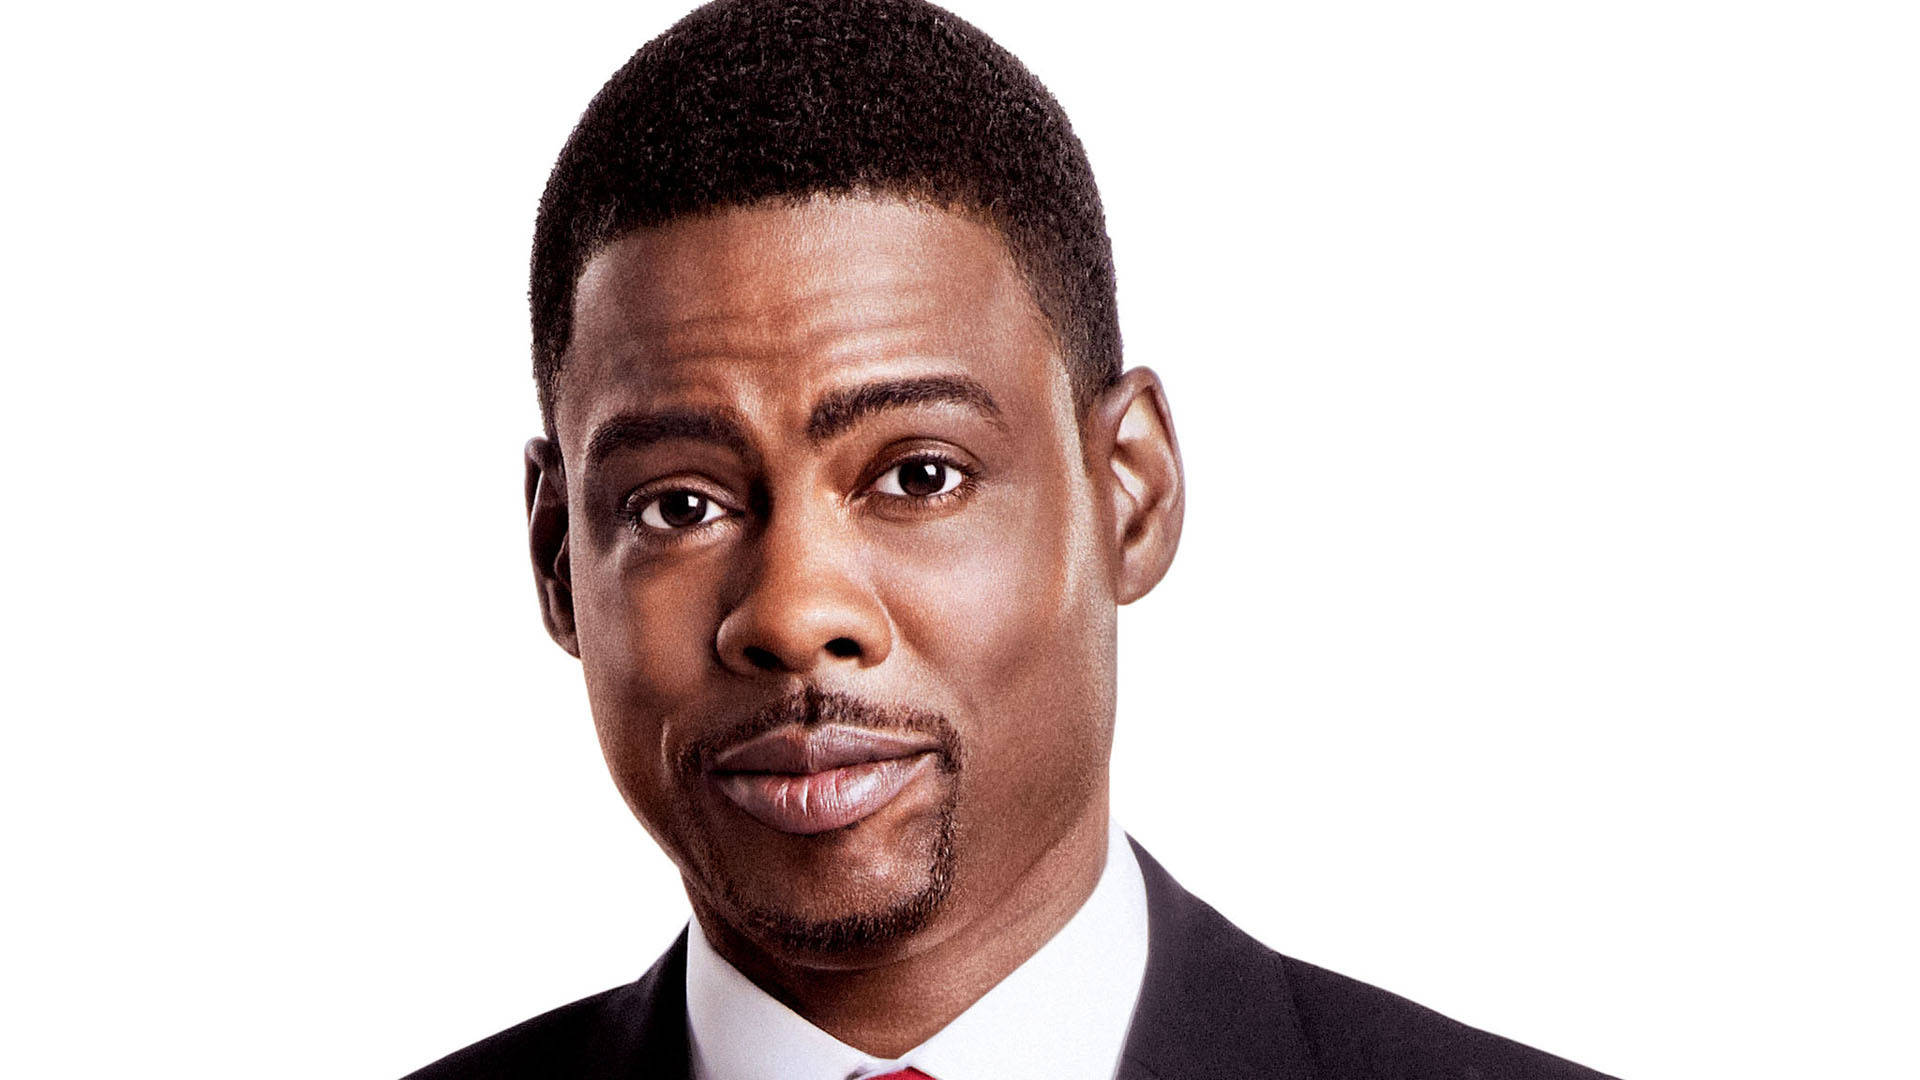 Comedian Chris Rock In A Close-up Shot Background